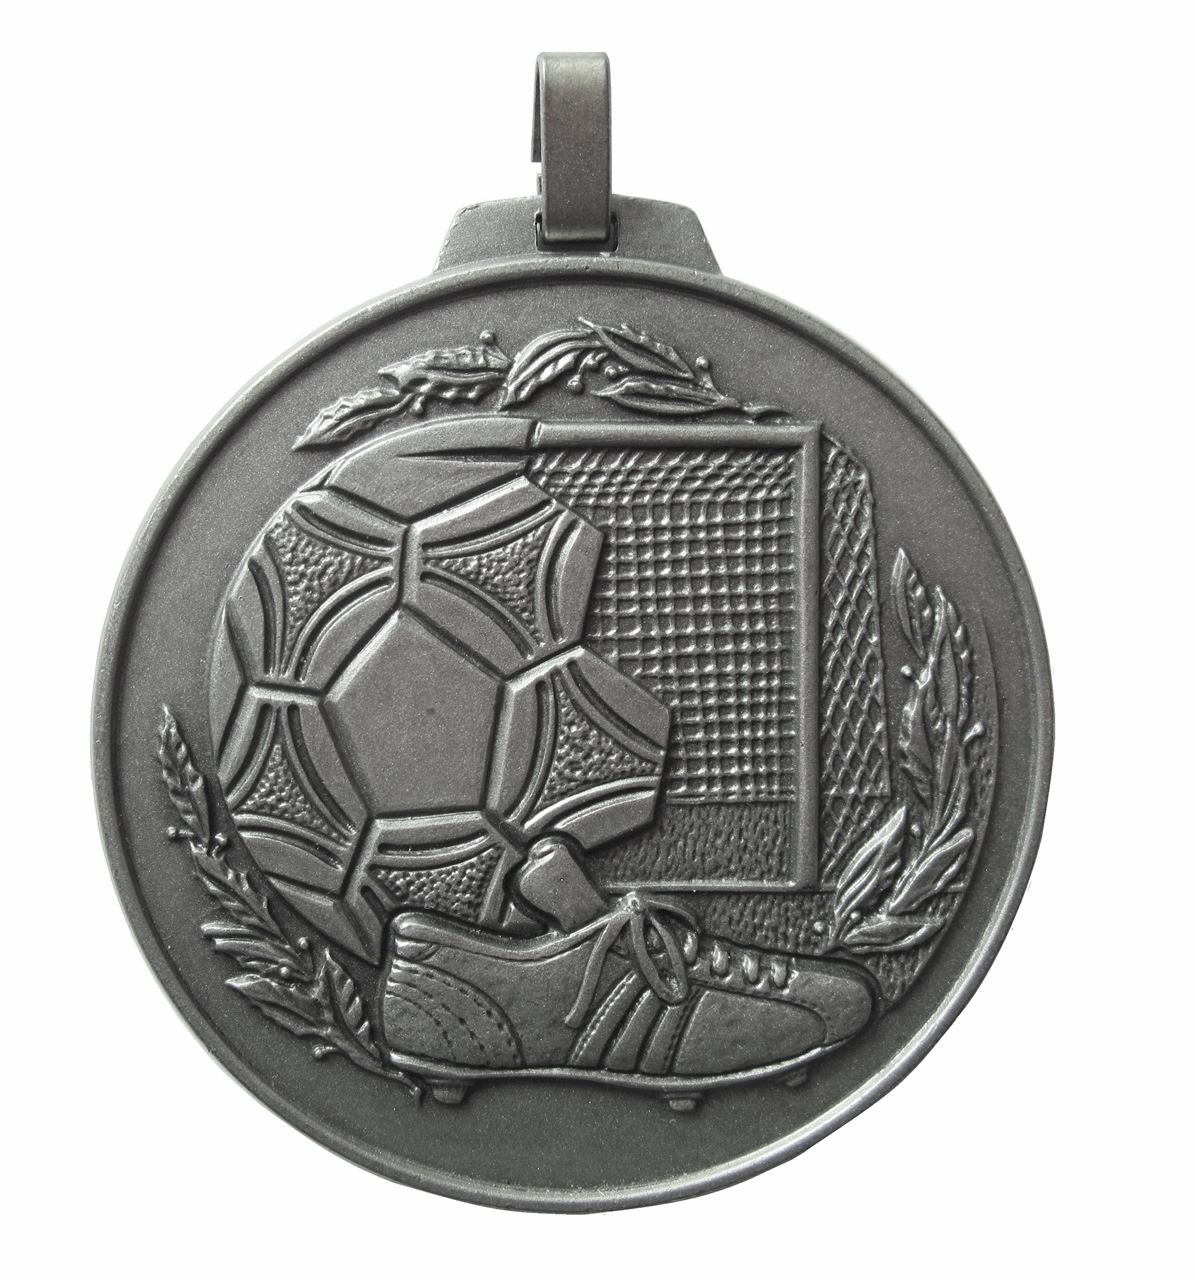 Silver Economy Football Boot Medal (size: 70mm) - 174E